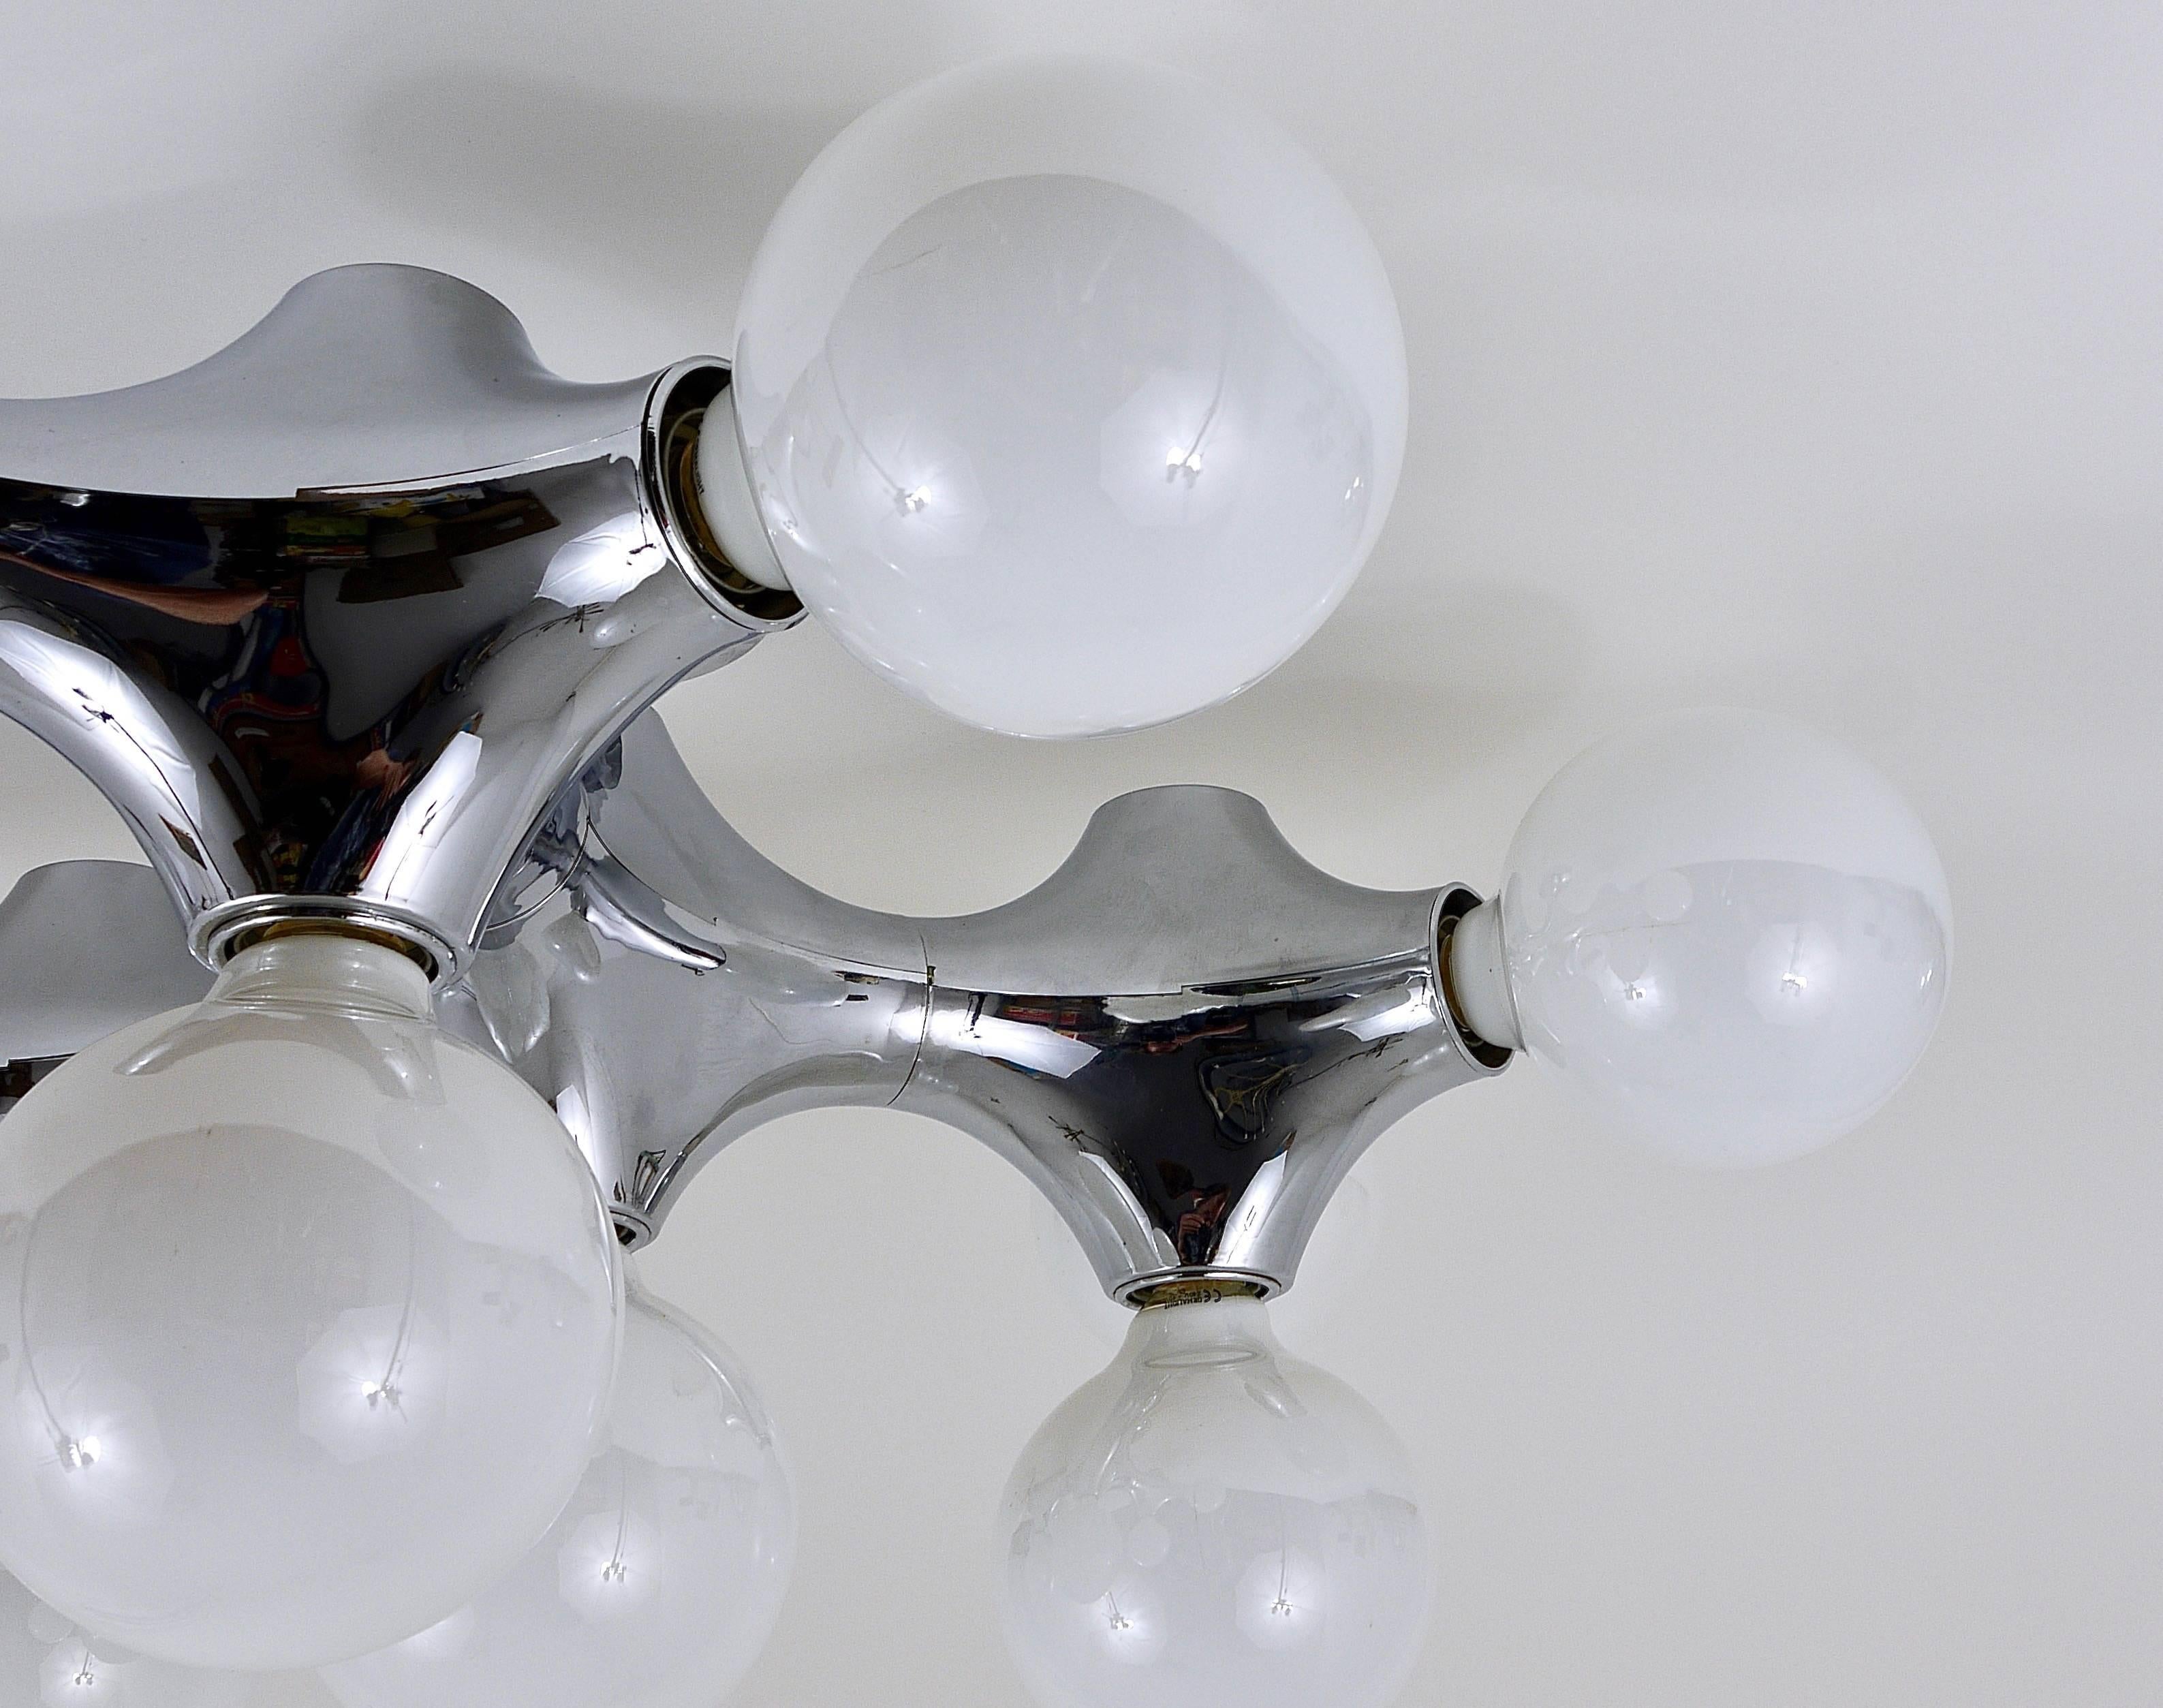 A beautiful Space Age lamp from the 1970s by Cosack, Germany. Made of chrome-plated plastic. A stunning piece, in excellent condition with very marginal wear. The lamp takes ten large Edison base bulbs. A very stylish light.